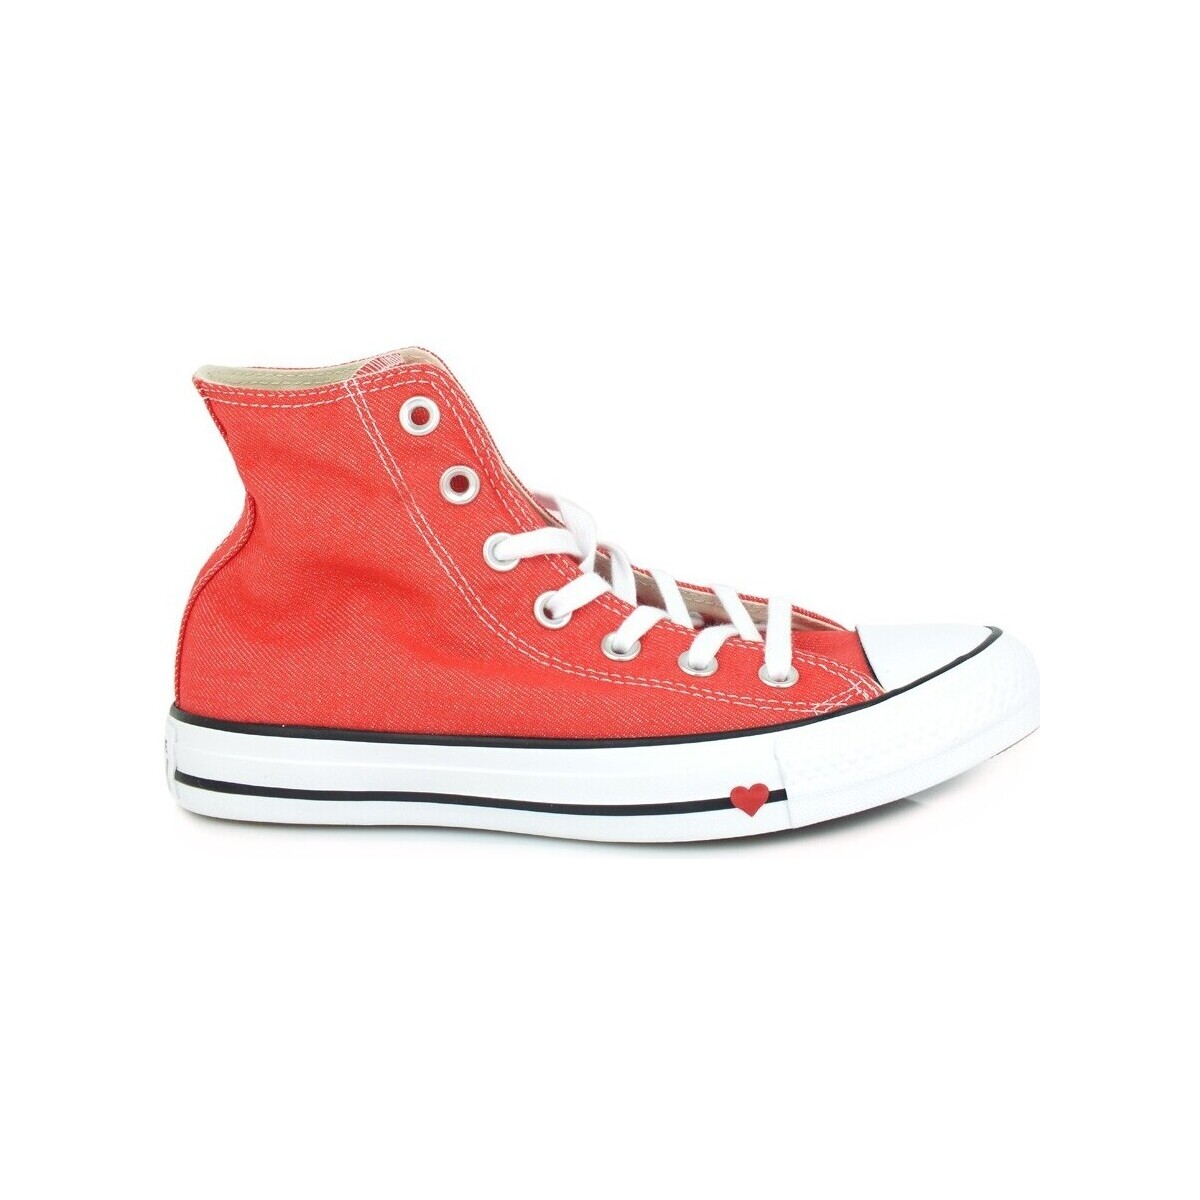 Chaussures Femme Bottes Converse C.T. All Star Red 163305C Rouge